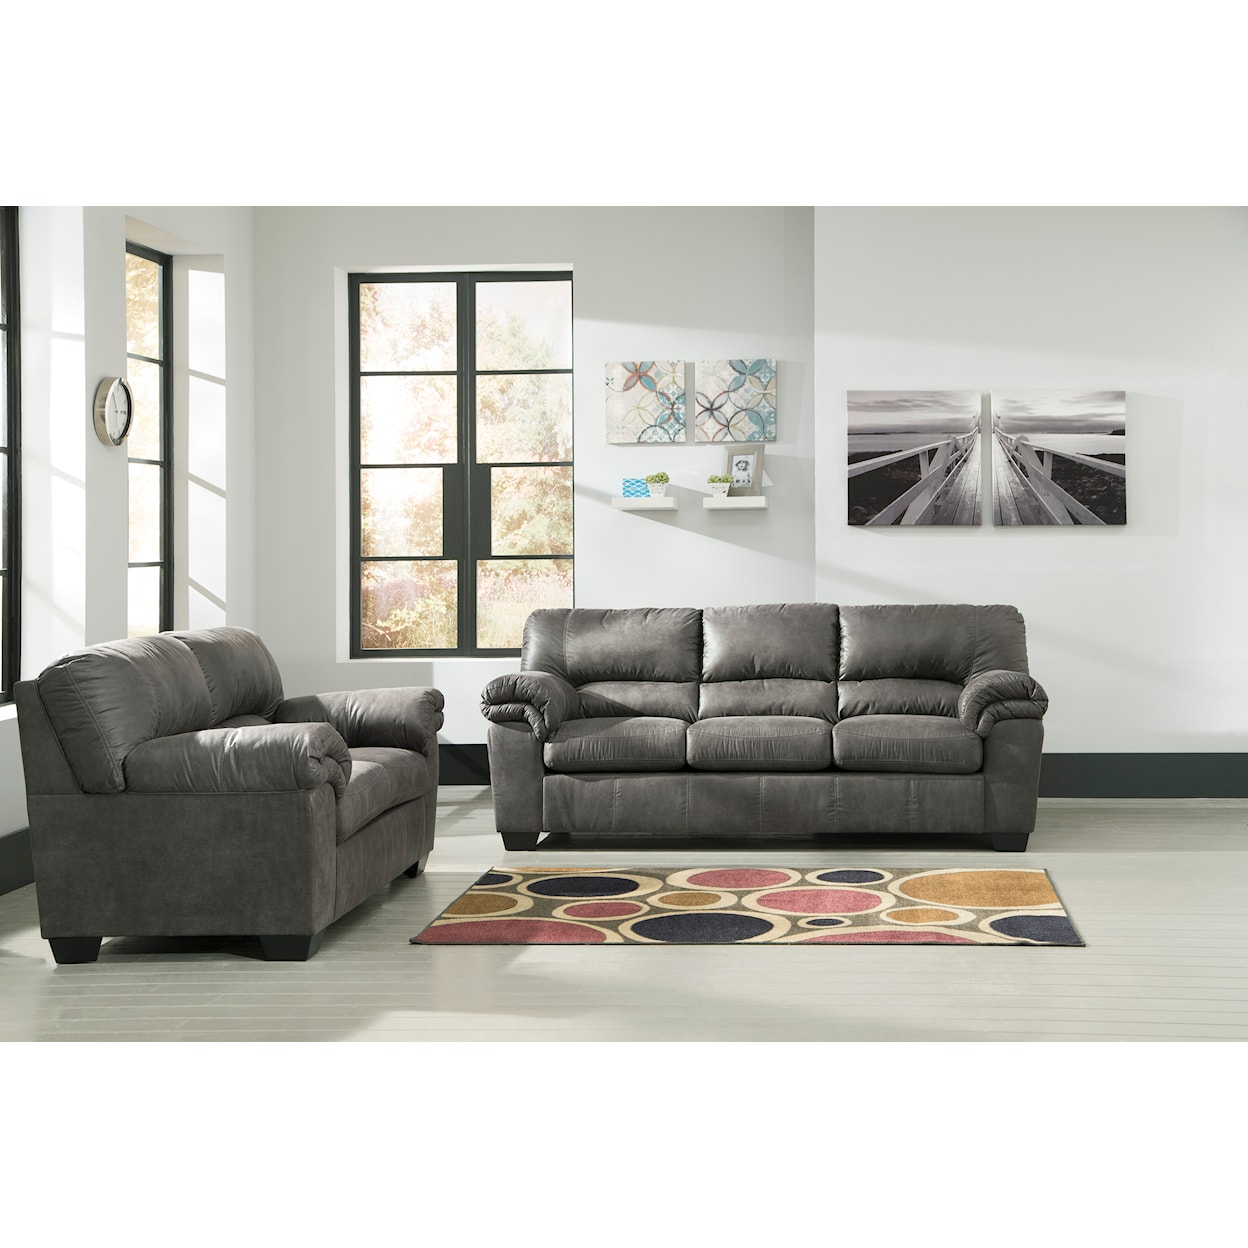 Signature Design by Ashley Bladen Sofa and Loveseat